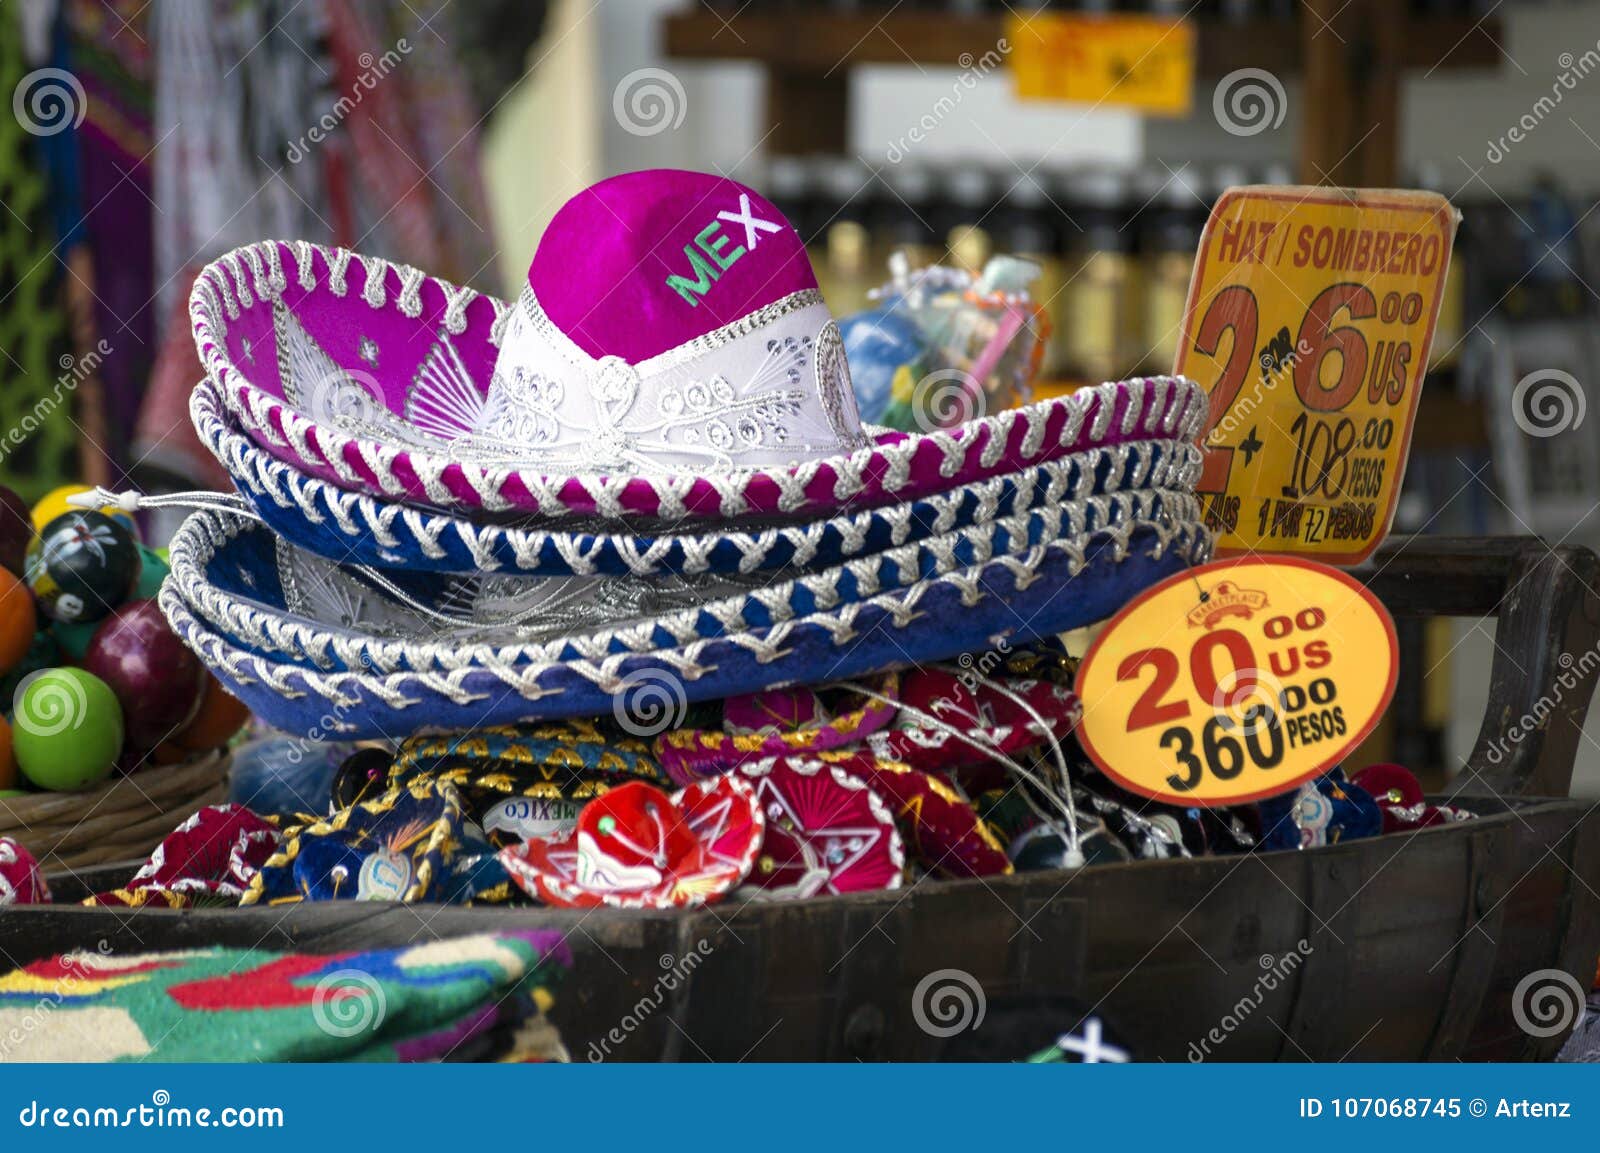 sombreros for sale in mexico